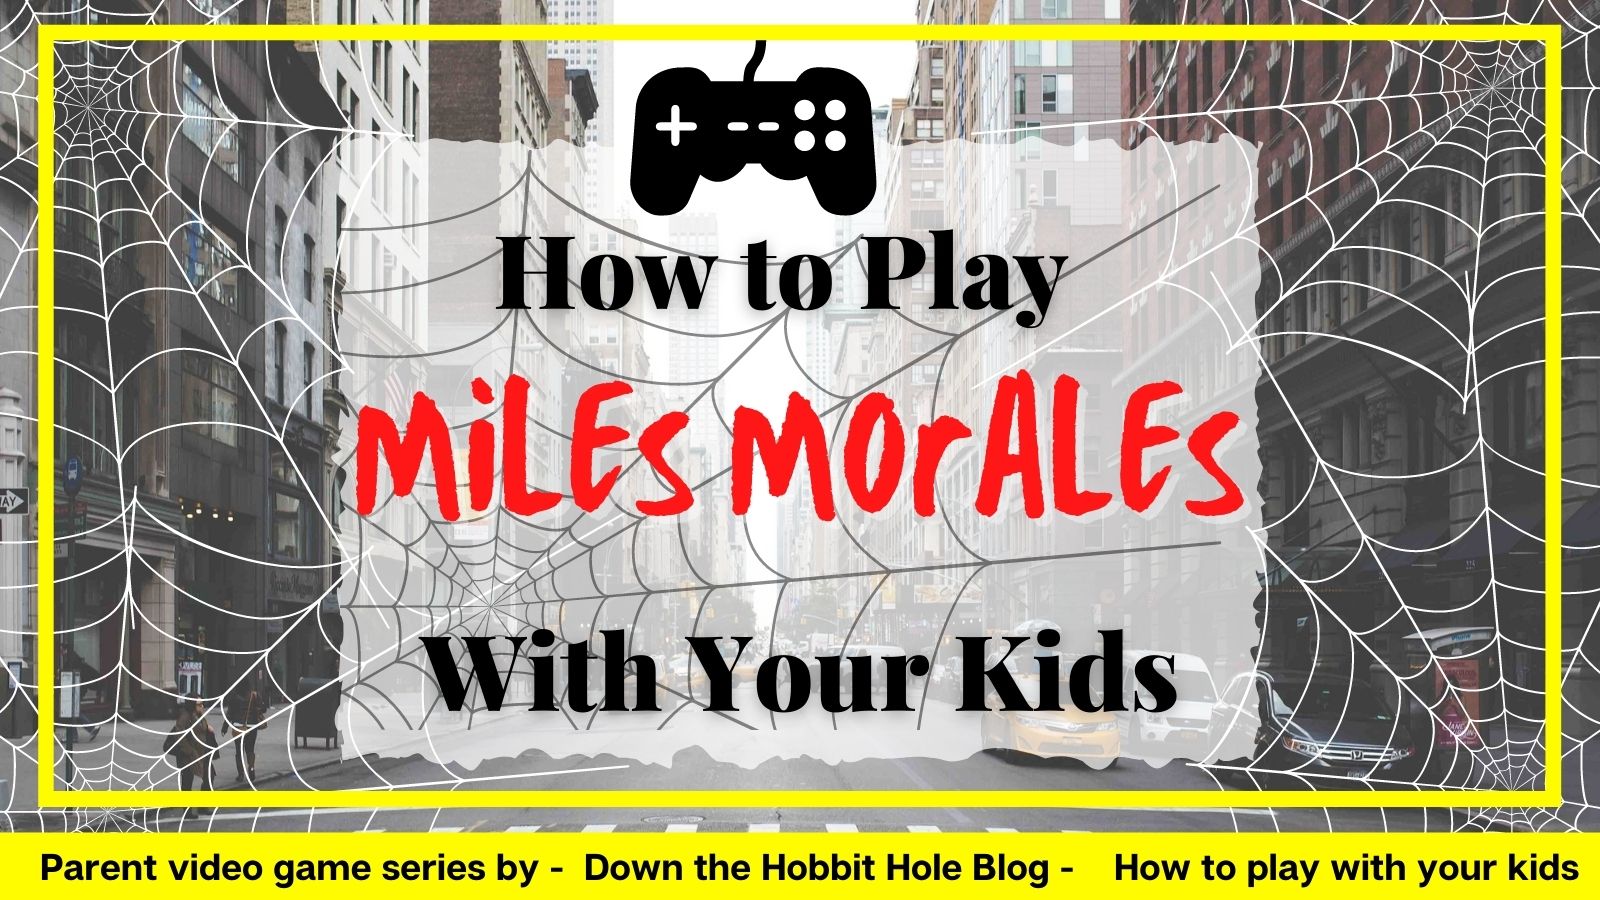 S[iderman Miles Morales Videogame Review; How to play Miles Morales With Your Kids